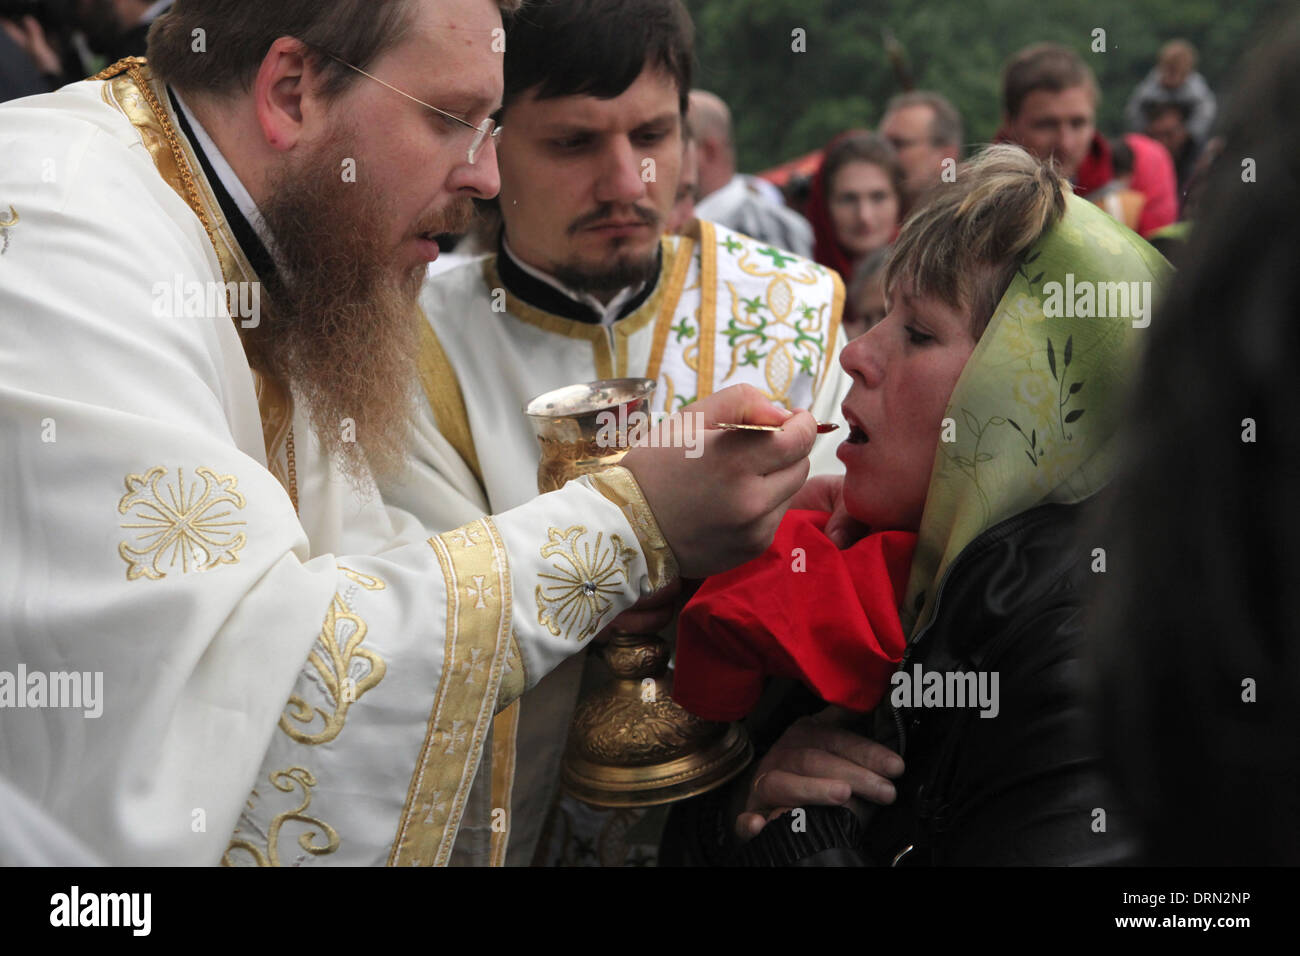 Orthodox believer receives the Eucharist during an orthodox service in honour of Saints Cyril and Methodius in Mikulcice. Stock Photo